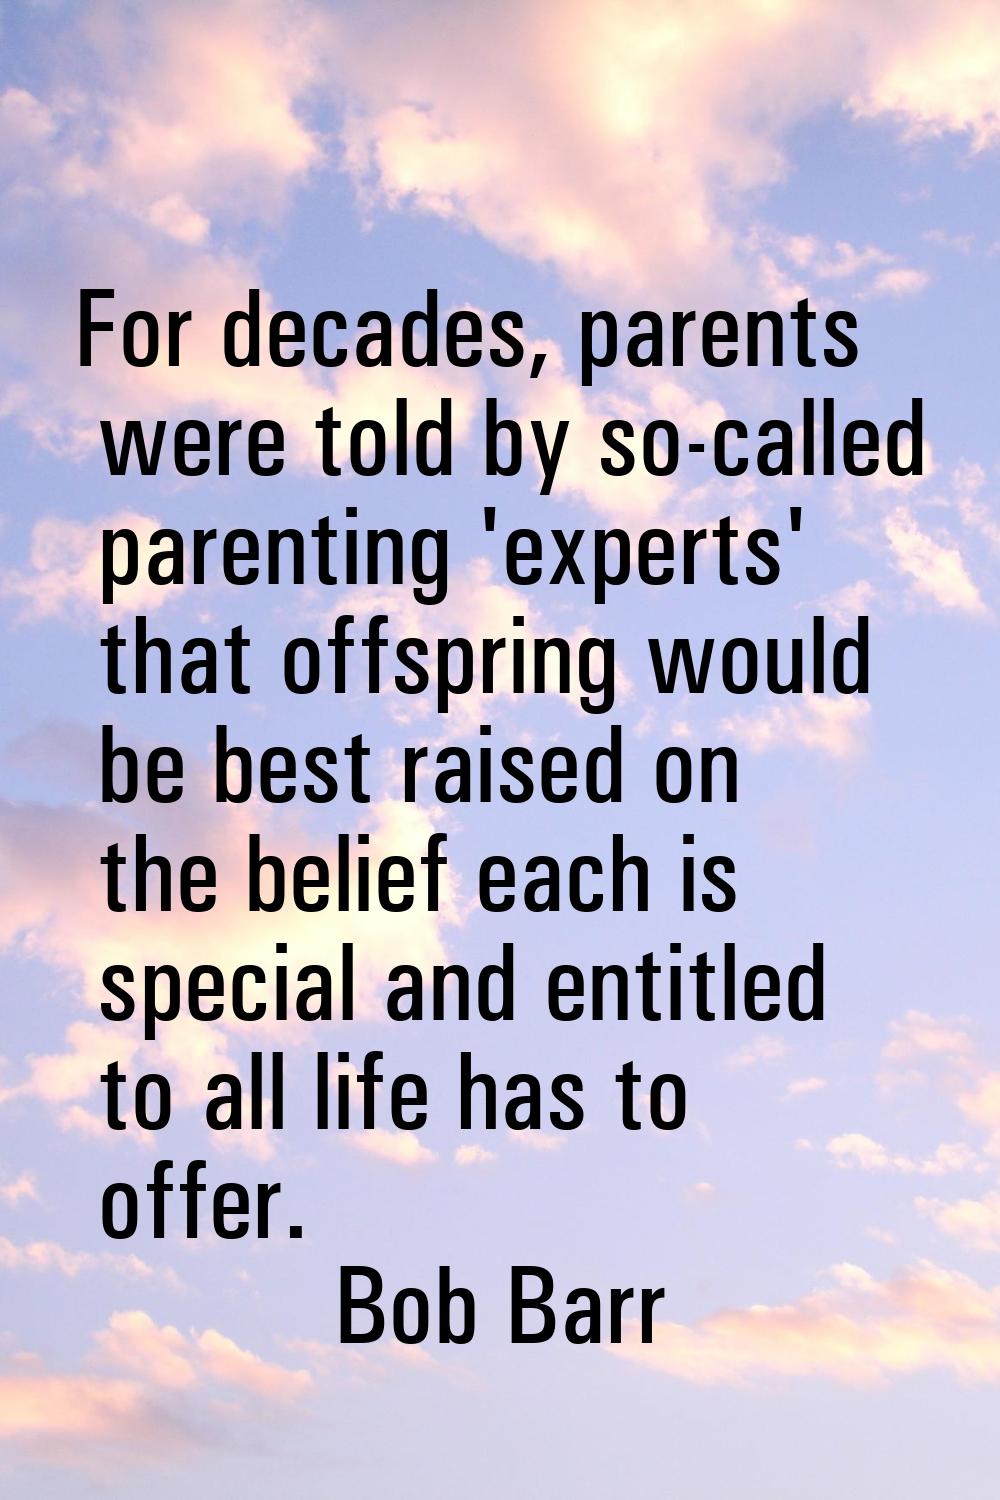 For decades, parents were told by so-called parenting 'experts' that offspring would be best raised